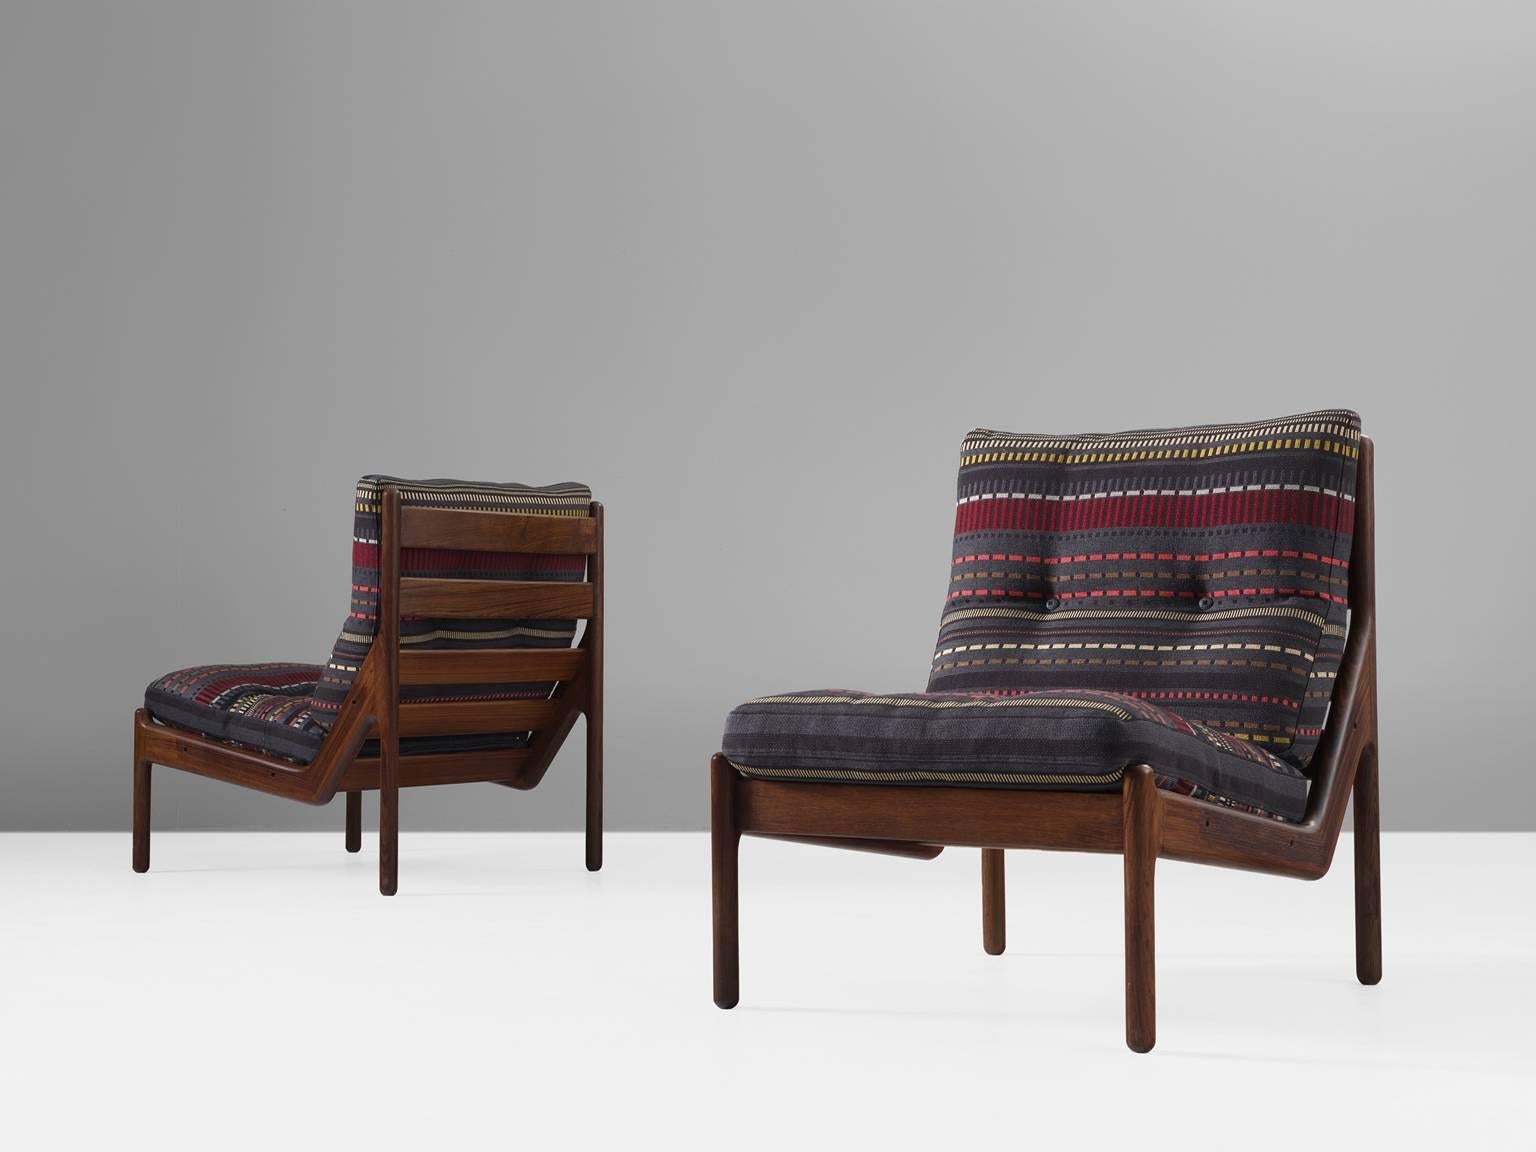 Pair of easy chairs, in oak and leather, by Illum Wikkelsø for C.F. Christensen, Denmark, 1972. 

Set of two armchairs, reupholstered in Point 007 Maharam by Kvadrat, designed by Paul Smith. Please note that the with the cushion show a frame in